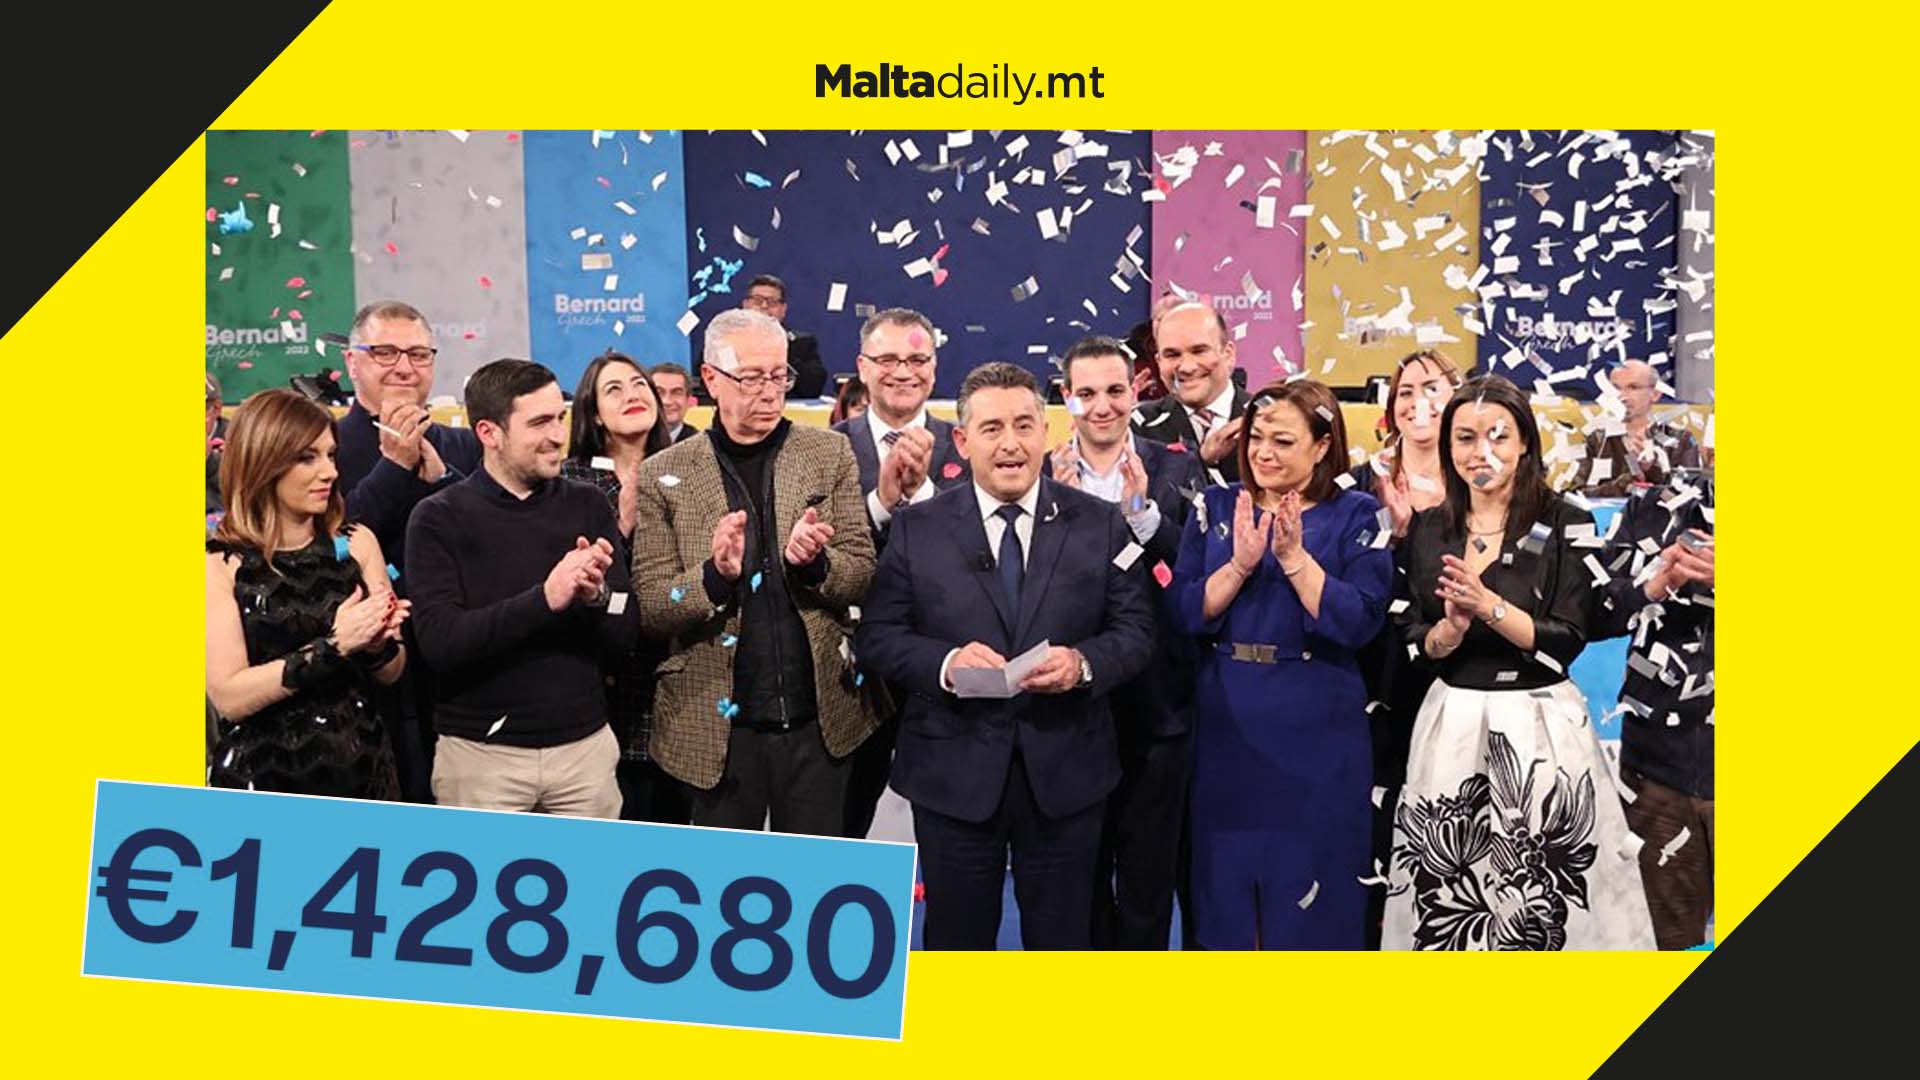 €1,428,680 in funds raised during PN’s electoral campaign